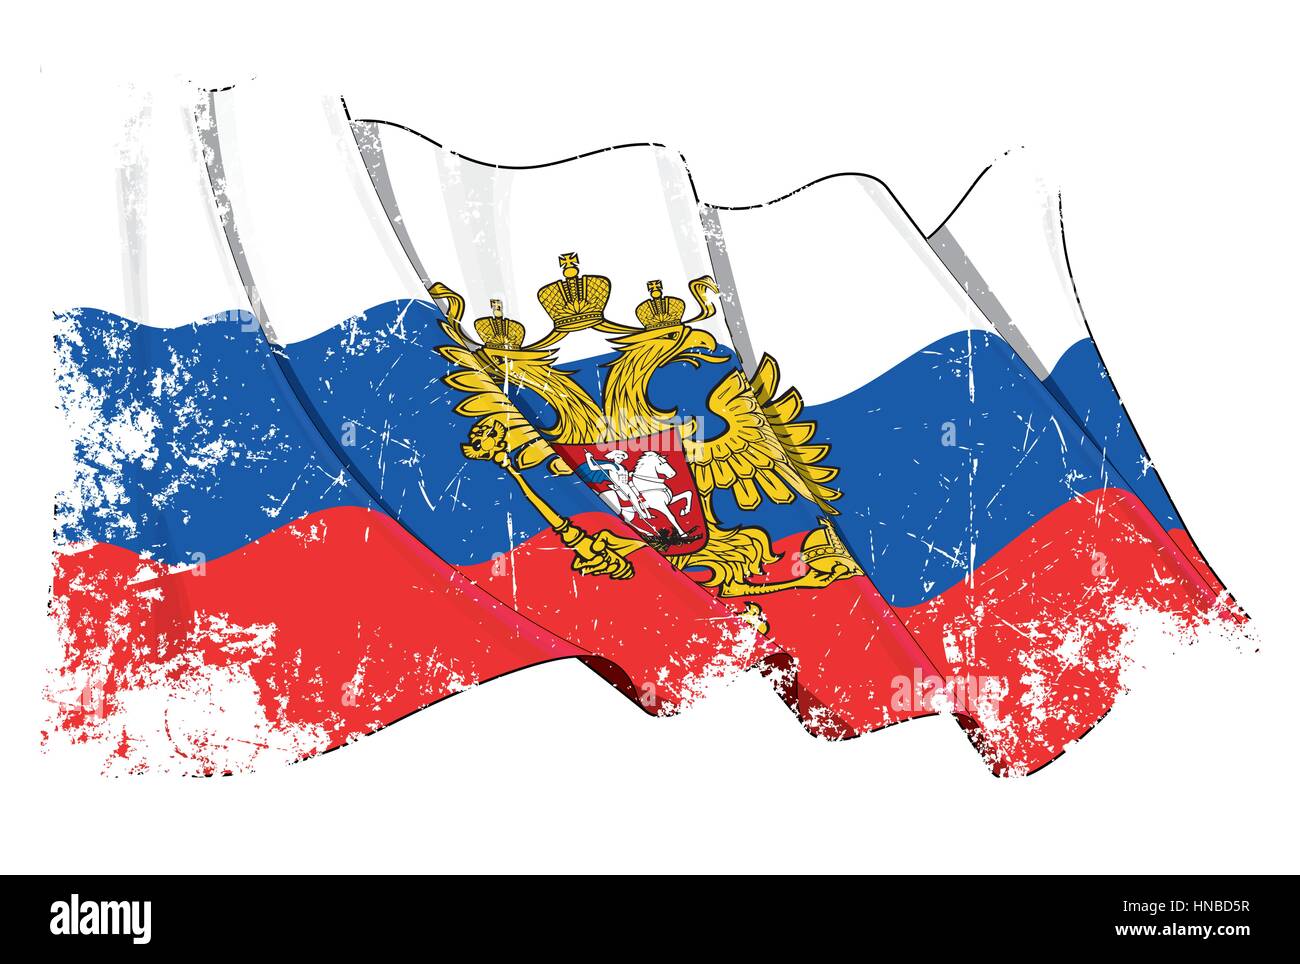 Grunge Vector Illustration of a Russian waving State Flag(with the eagle ensign). All elements neatly organized. Texture, Lines, Shading & Flag Colors Stock Vector